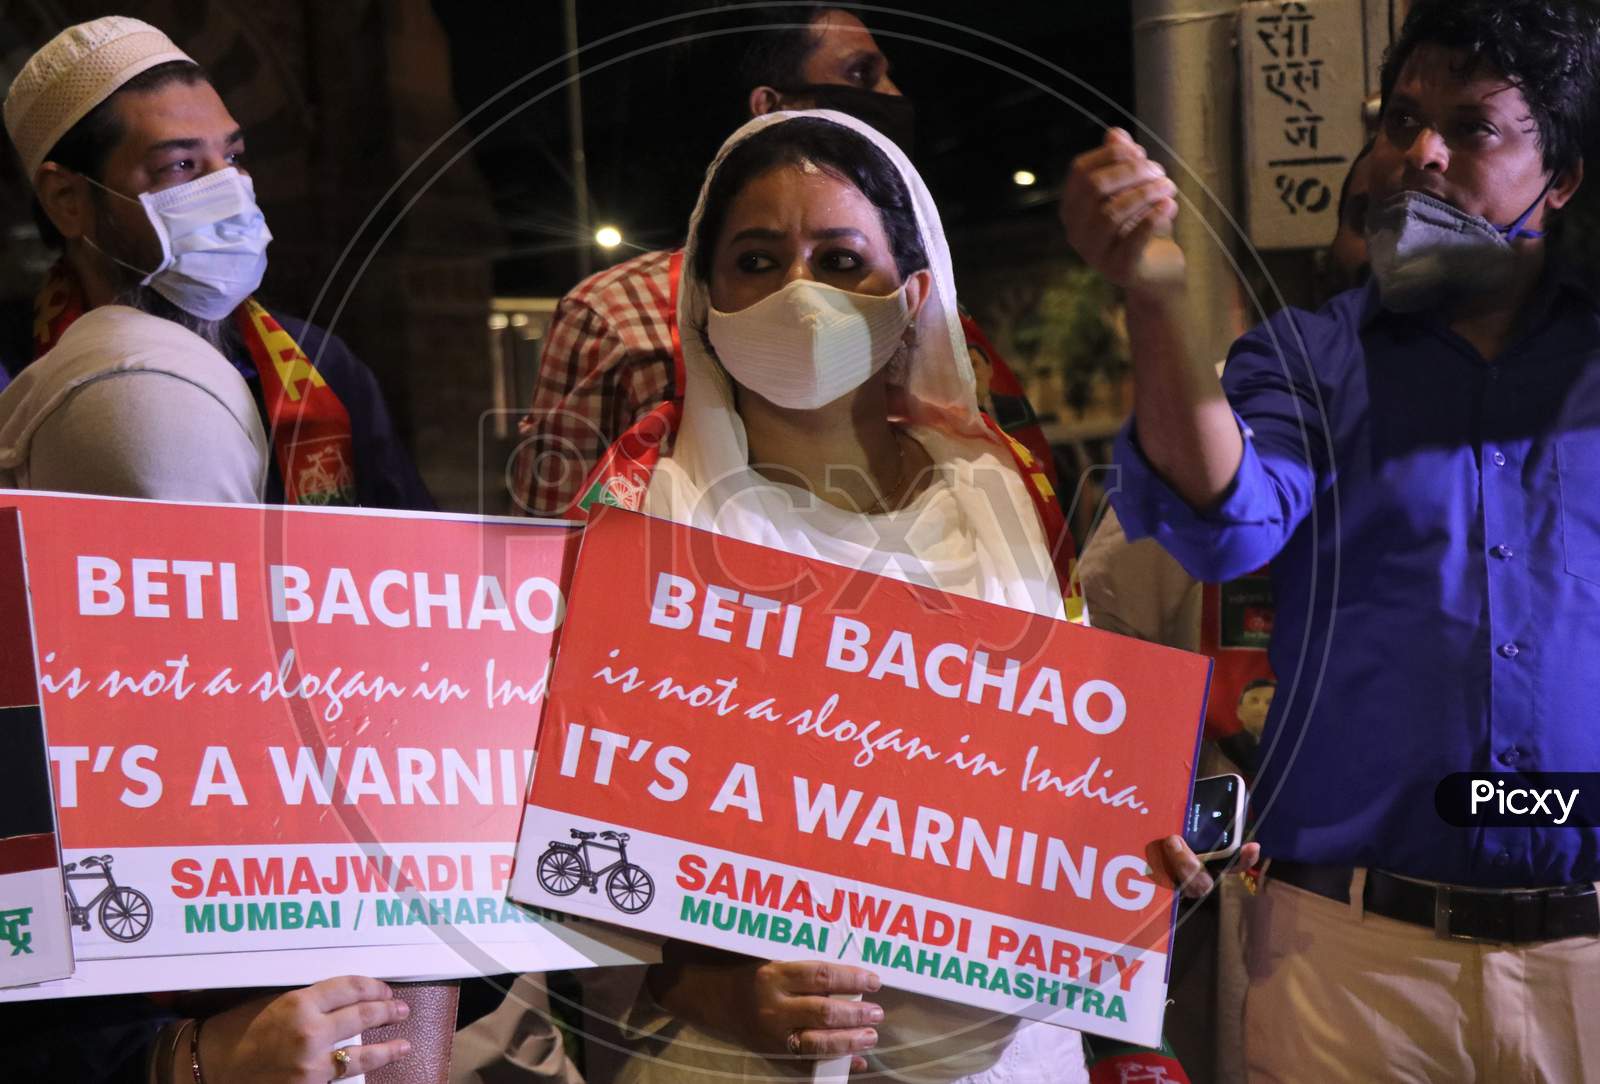 Women hold placards during a protest after the death of a rape victim, on a street in Mumbai, India, September 30, 2020.